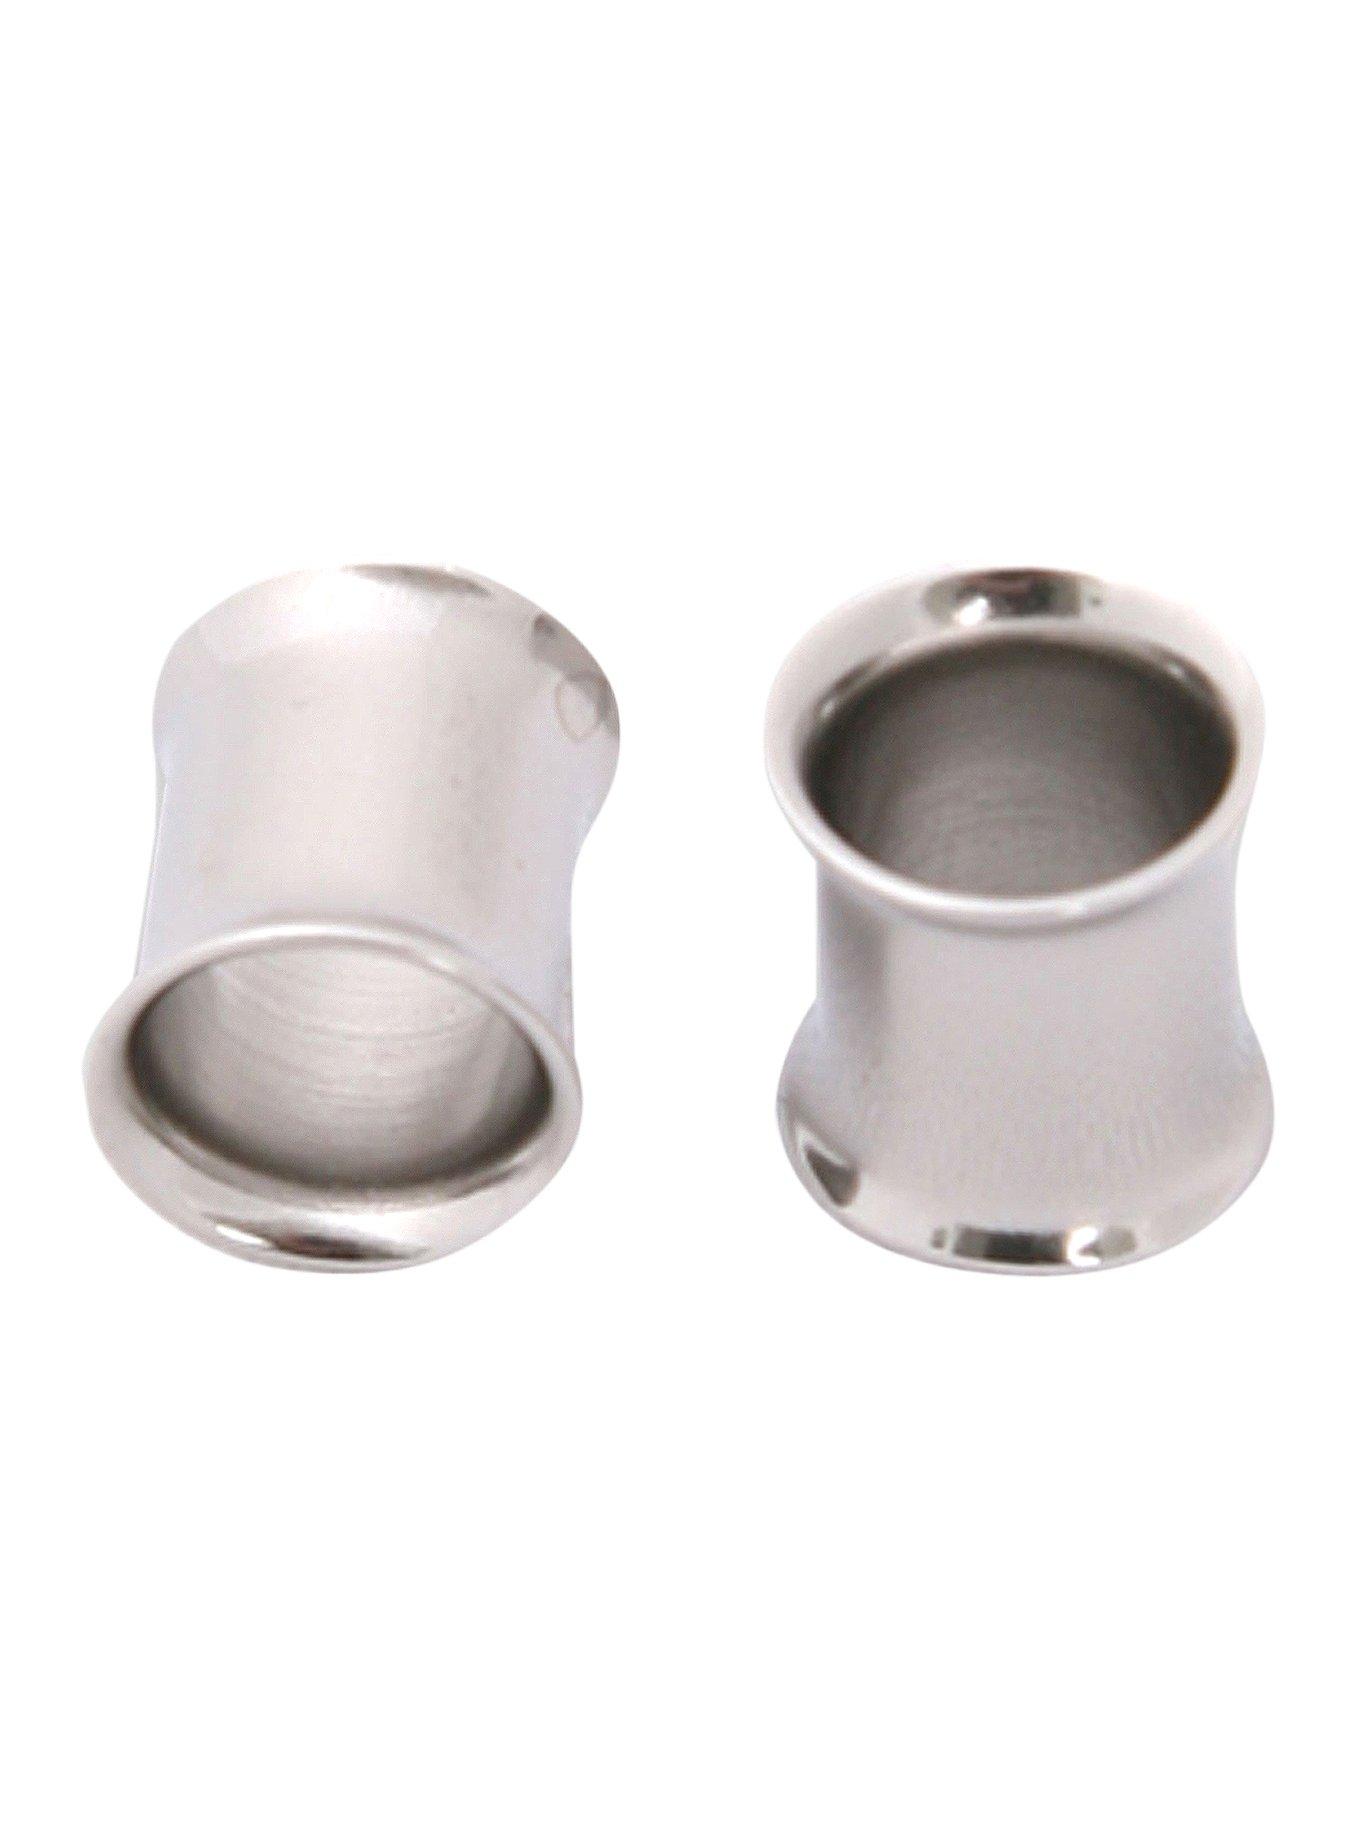 Double Flared Plug 2 Pack, SILVER, hi-res